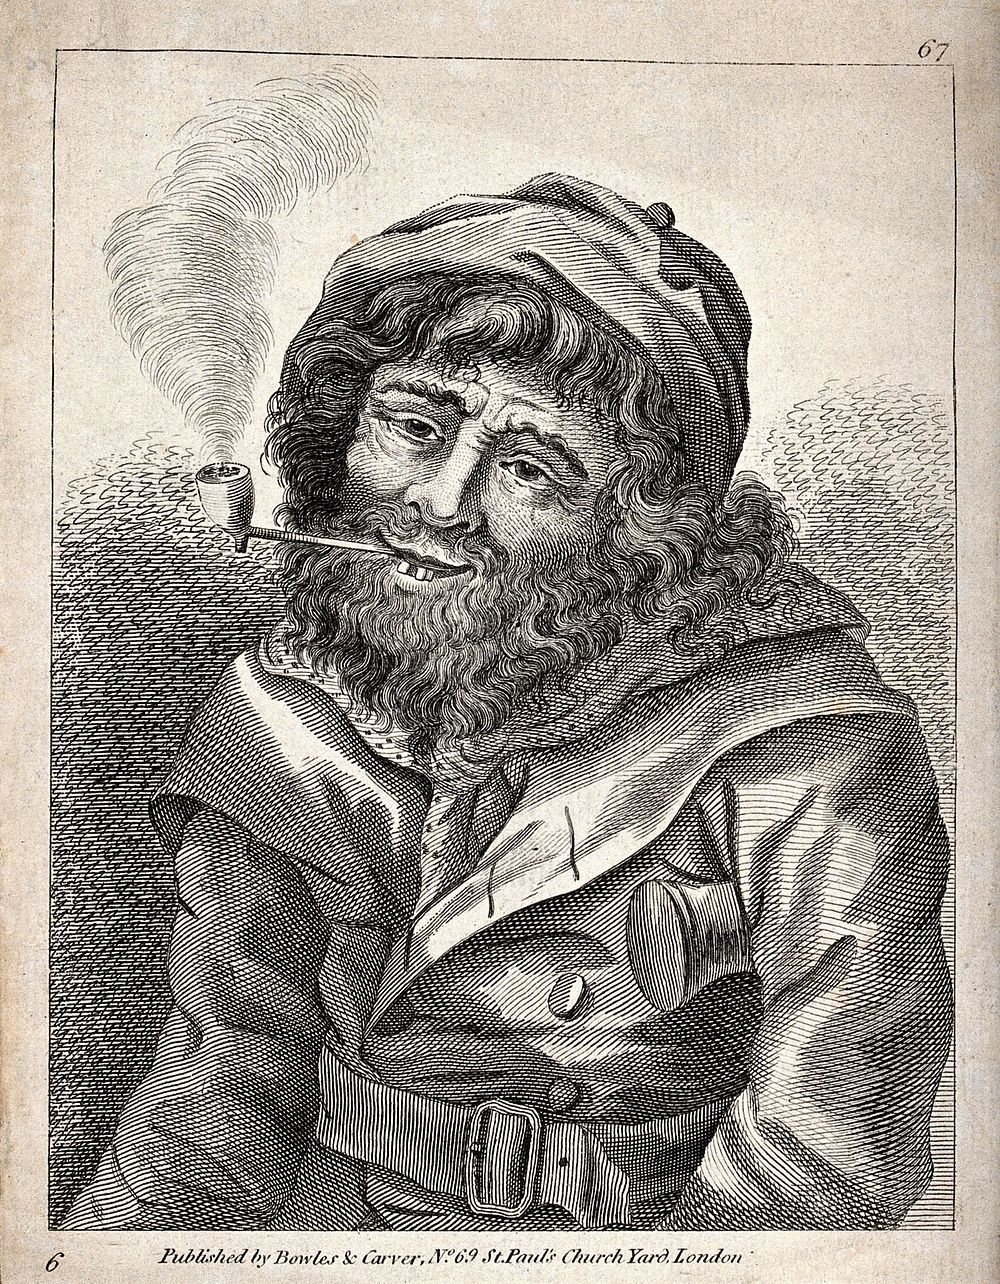 A seated man in a double-breasted coat smoking a pipe while he rests on a crutch under his left arm. Line engraving with…